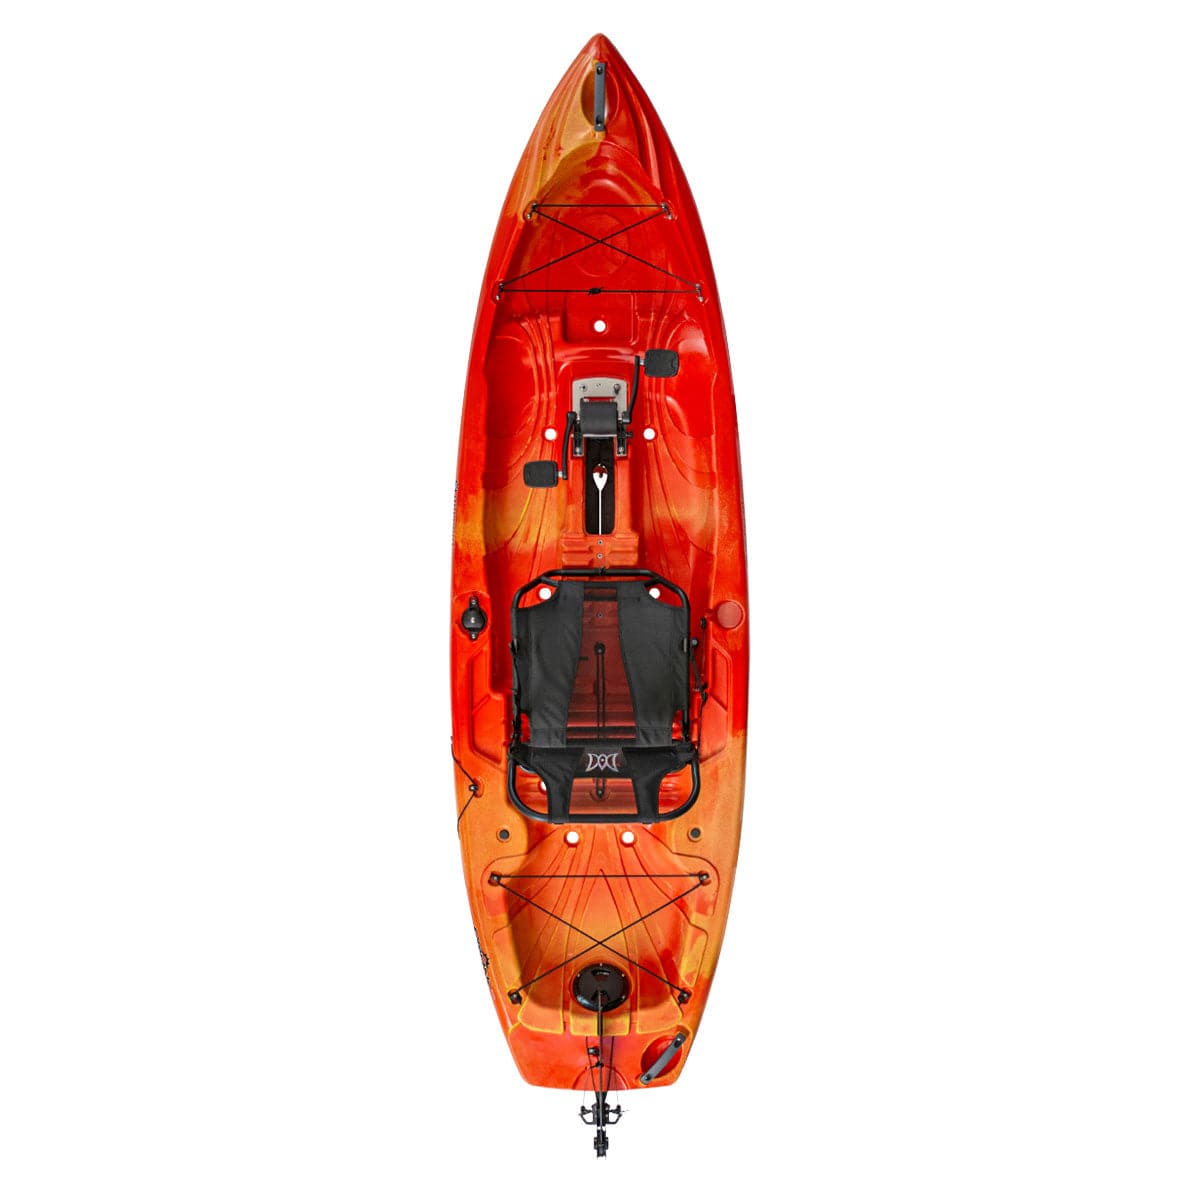 Featuring the Crank 10 fishing kayak, pedal drive kayak manufactured by Perception shown here from a fourth angle.